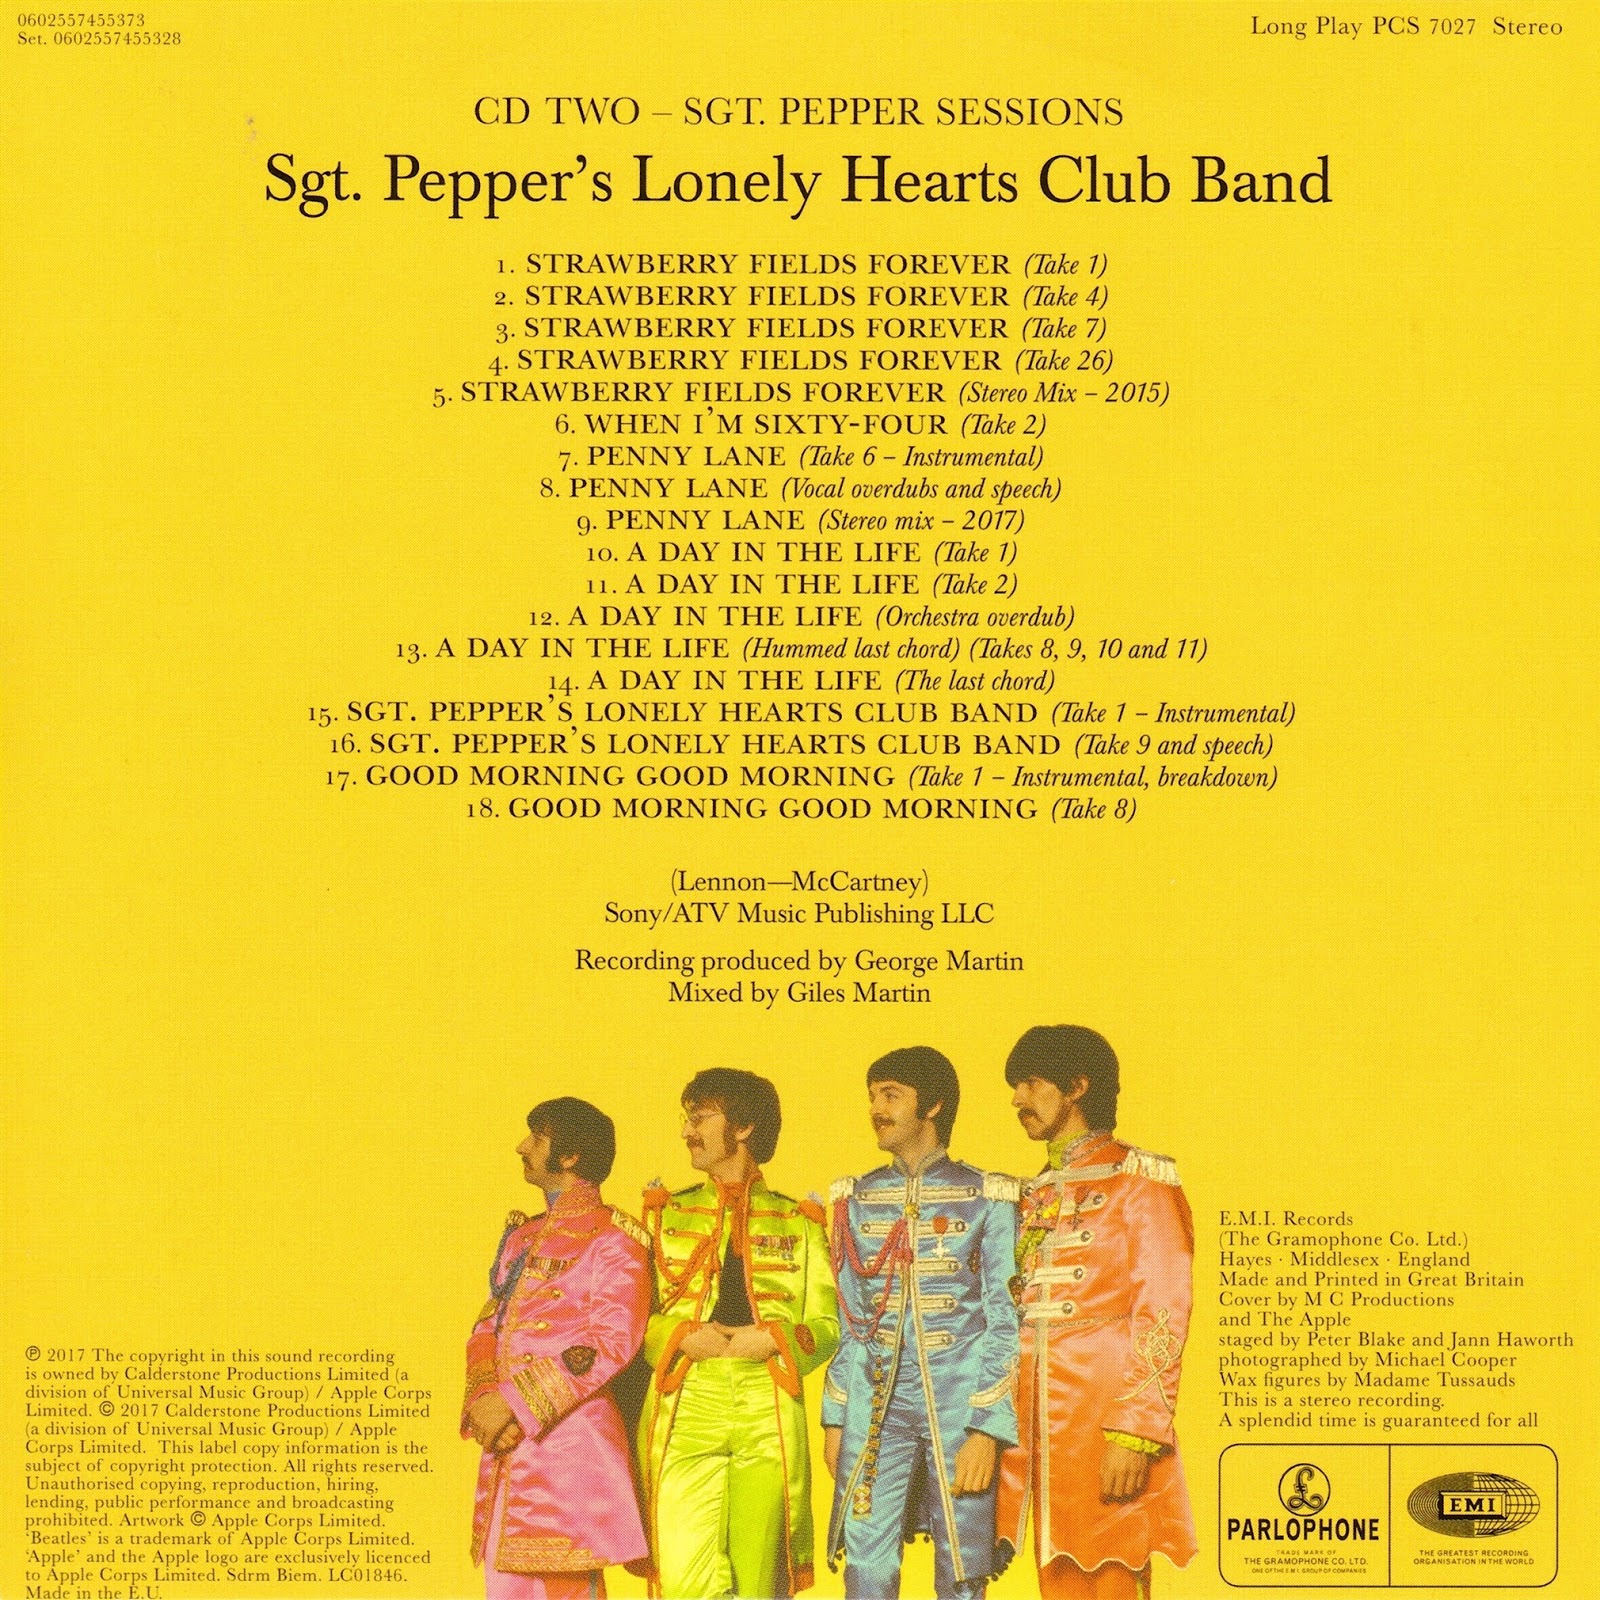 Beatles sgt pepper lonely. Cover Sgt. Pepper`s Lonely Hearts Club Band (1967). Sgt Pepper's Lonely Hearts Club Band album Cover. Beatles Sergeant Pepper's Lonely Hearts Club Band. Битлз Sgt Pepper s Lonely Hearts Club Band.